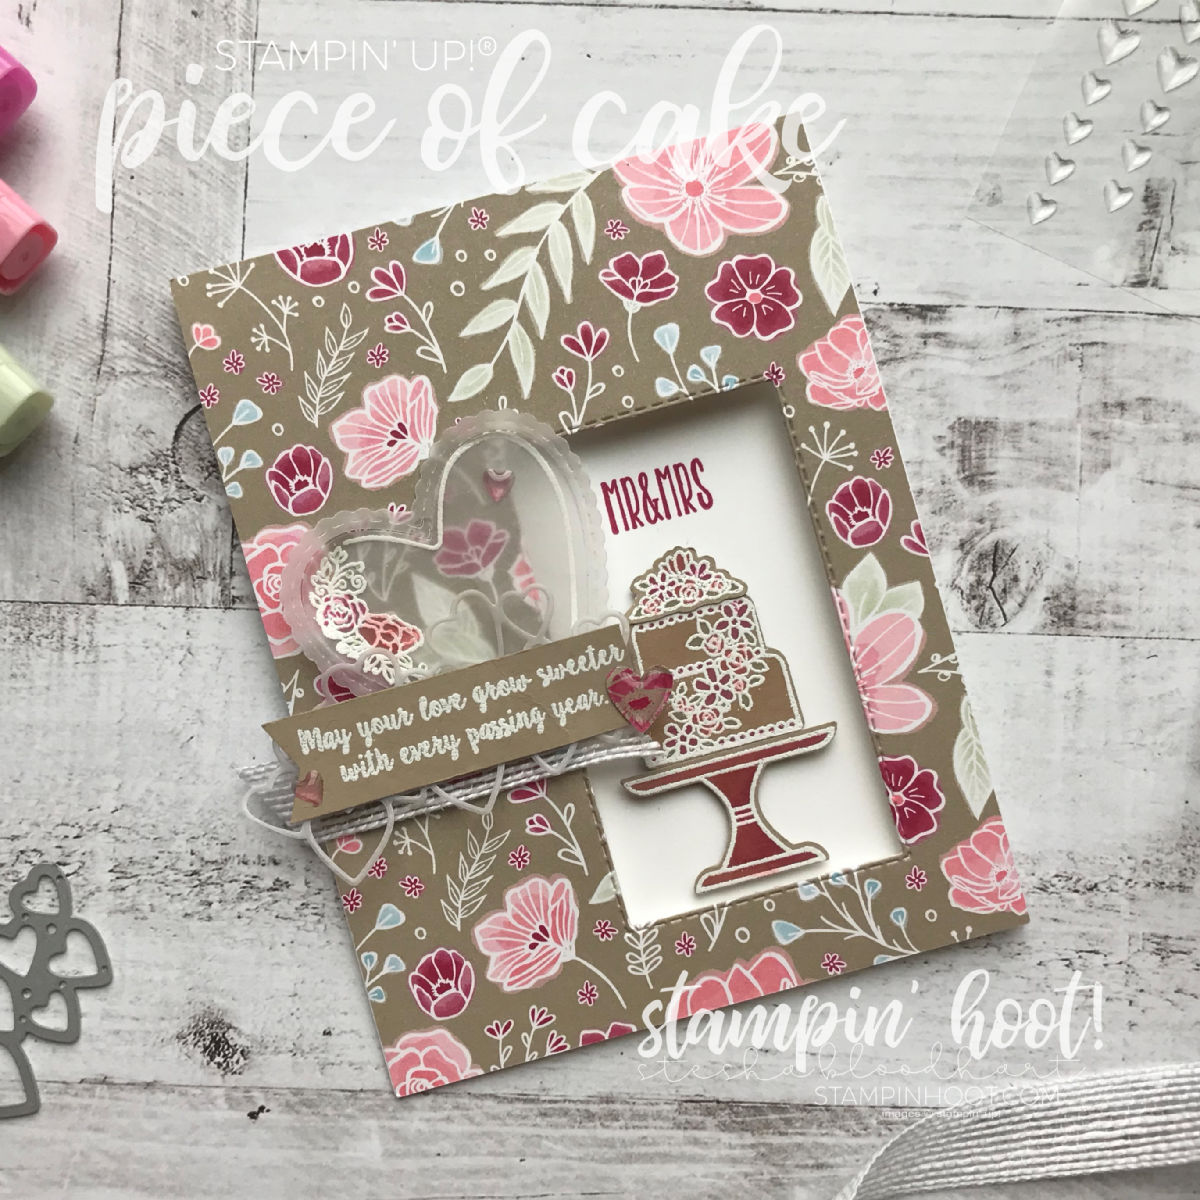 Piece of Cake Bundle, Meant to Be Bundle, All My Love Designer Series Paper Created by Stampin' Up! 2019 Artisan Design Team Member Stesha Bloodhart, Stampin' Hoot! #steshabloodhart